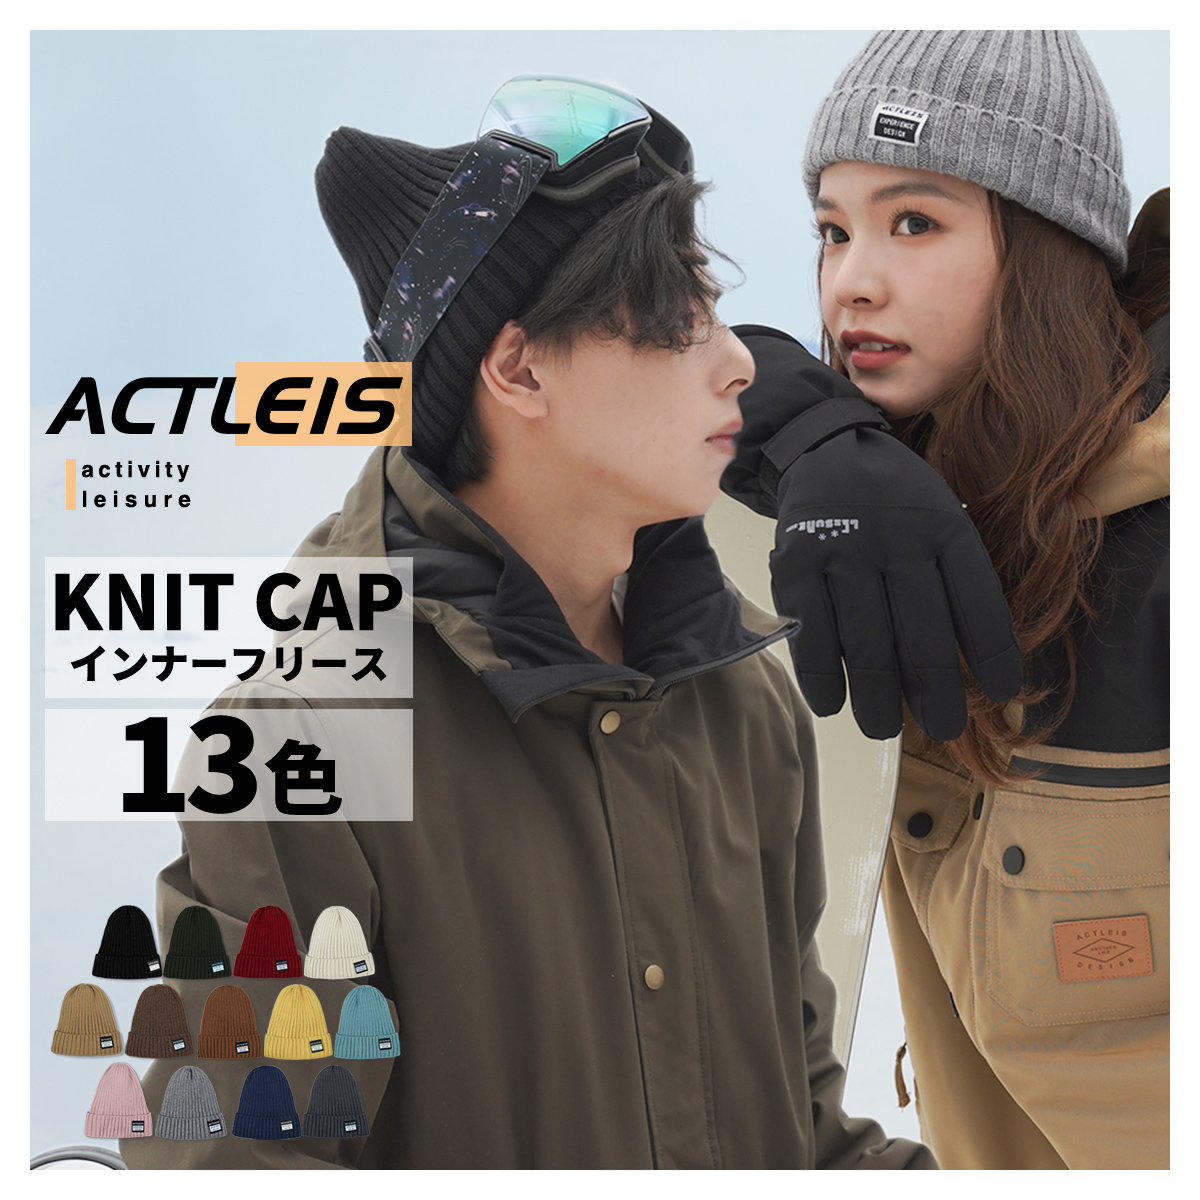  knitted cap men's lady's free shipping stylish knitted cap . knit cap snowboard ski snowboard snowboard snowboard ribbed reverse side f lease 